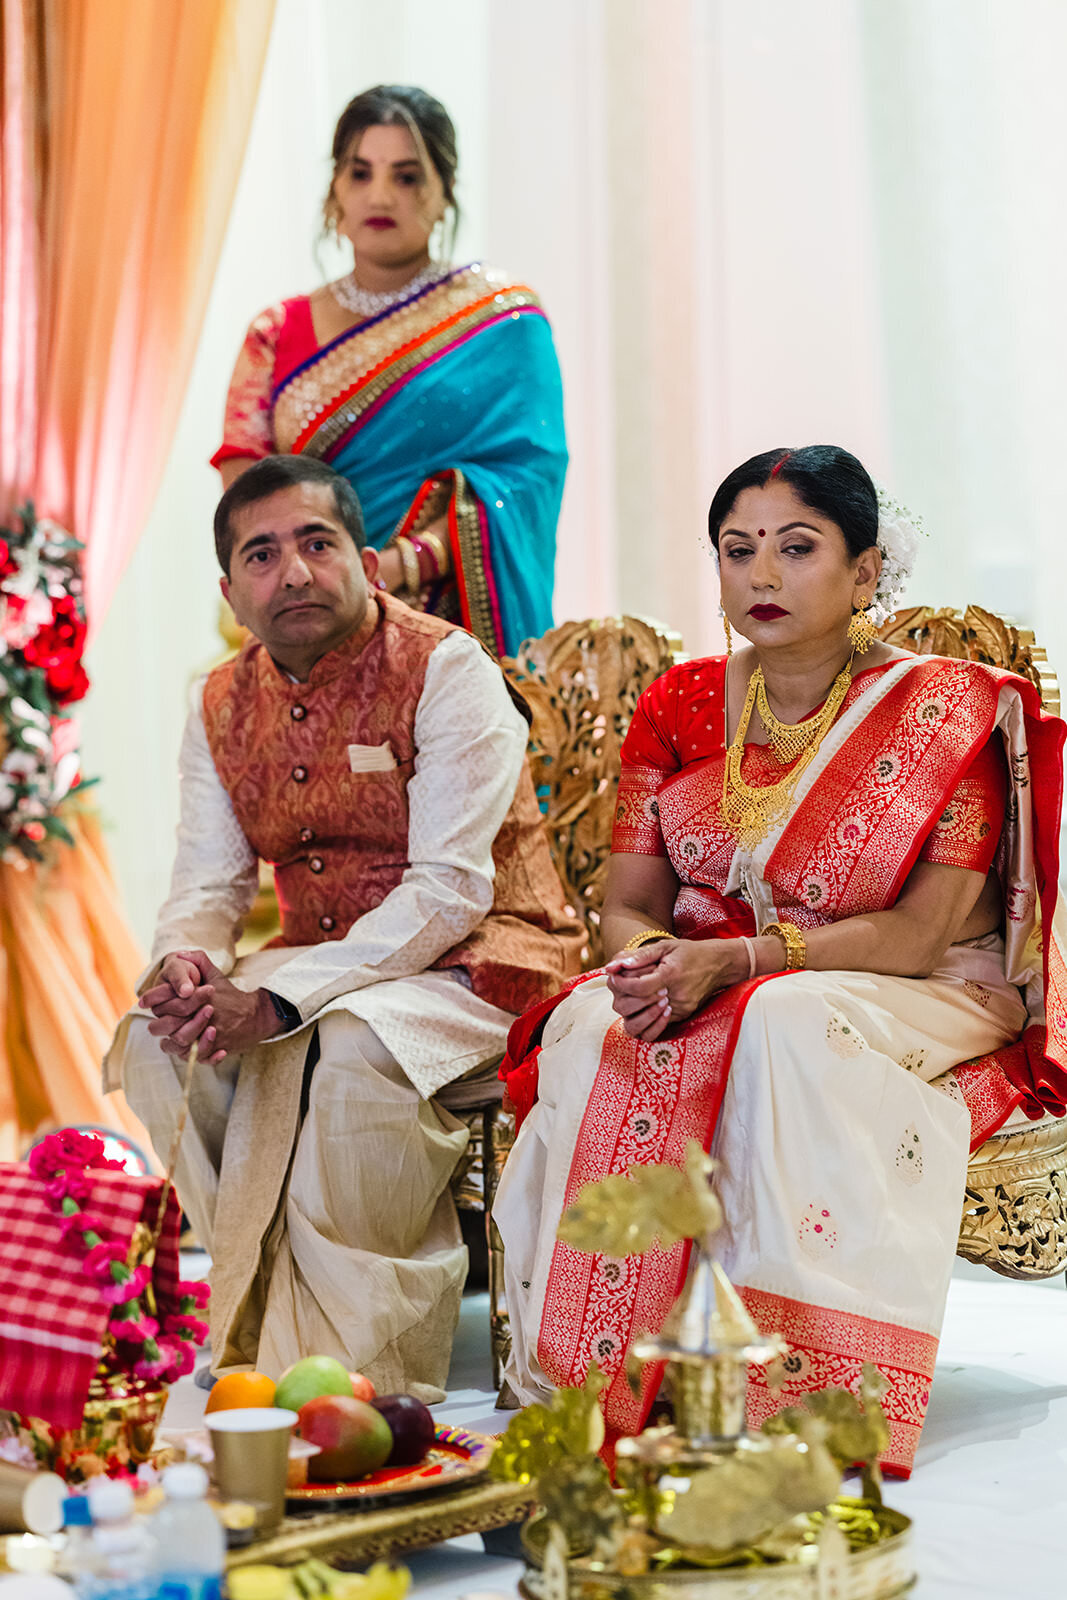 Two seated adults, a man in traditional Indian attire and a woman in a red and white saree, appear focused on a ceremony, with a standing woman in the background.